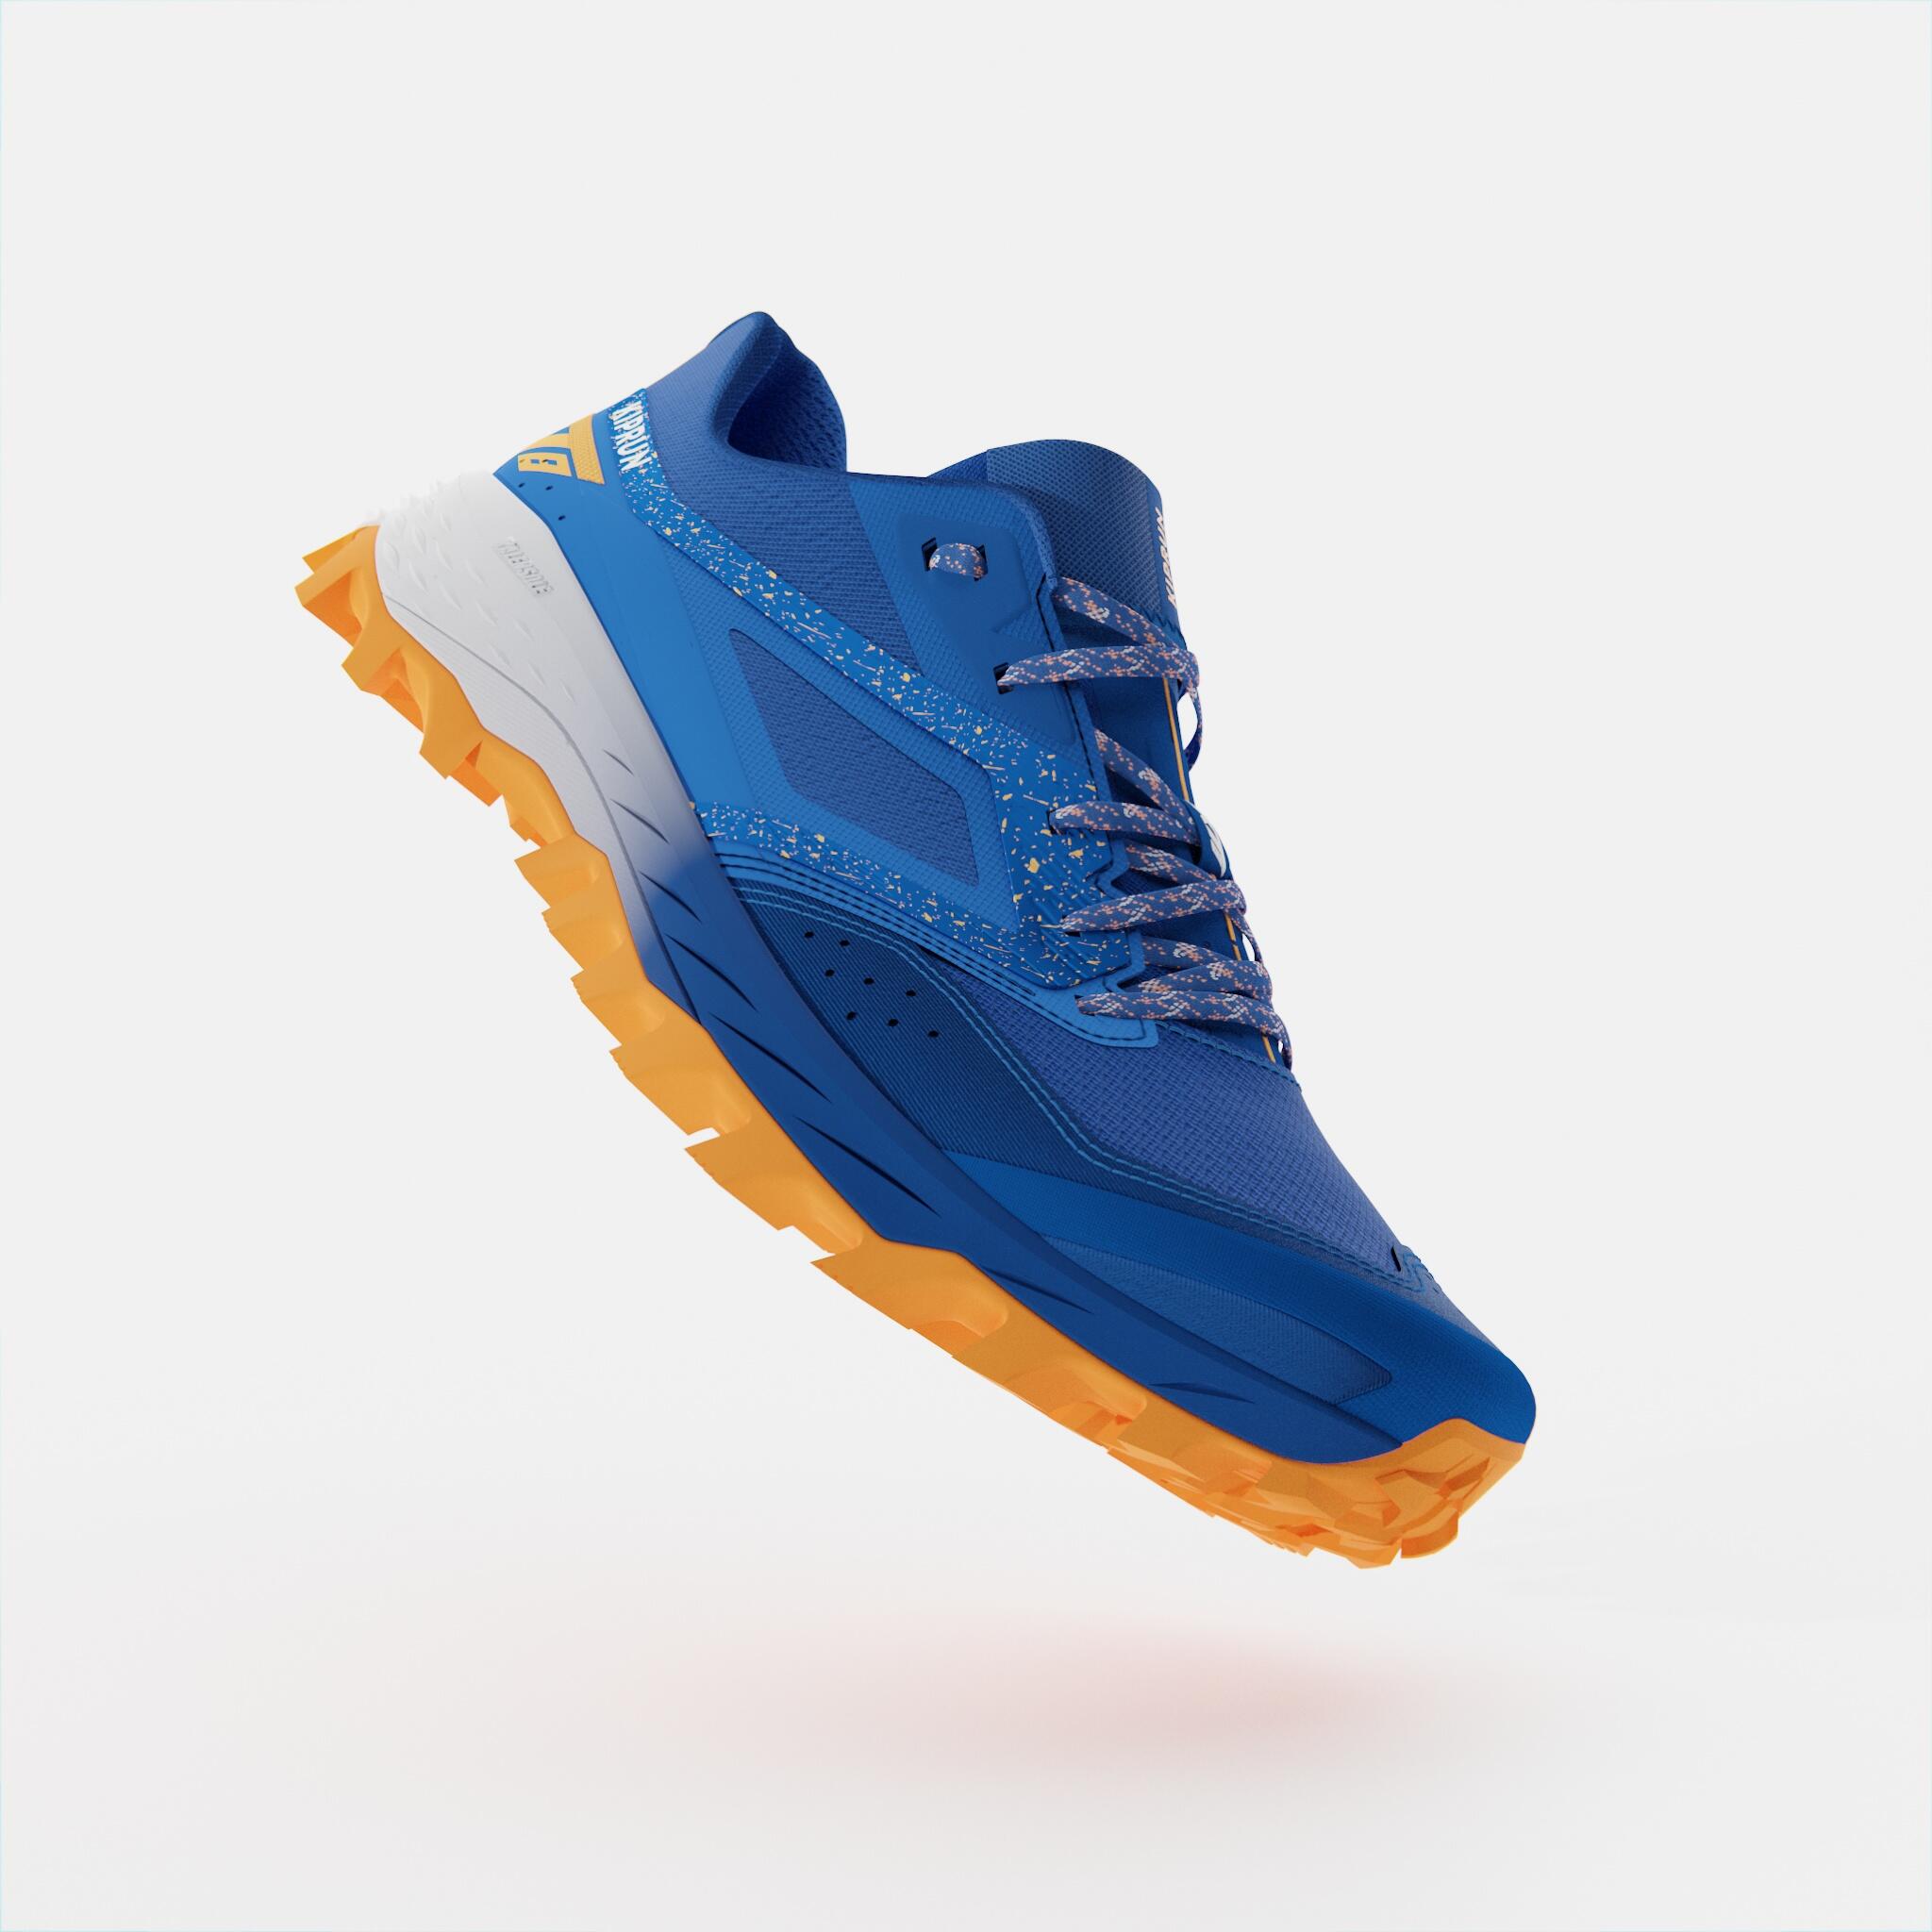 XT8 men's trail running shoes blue and orange 3/10